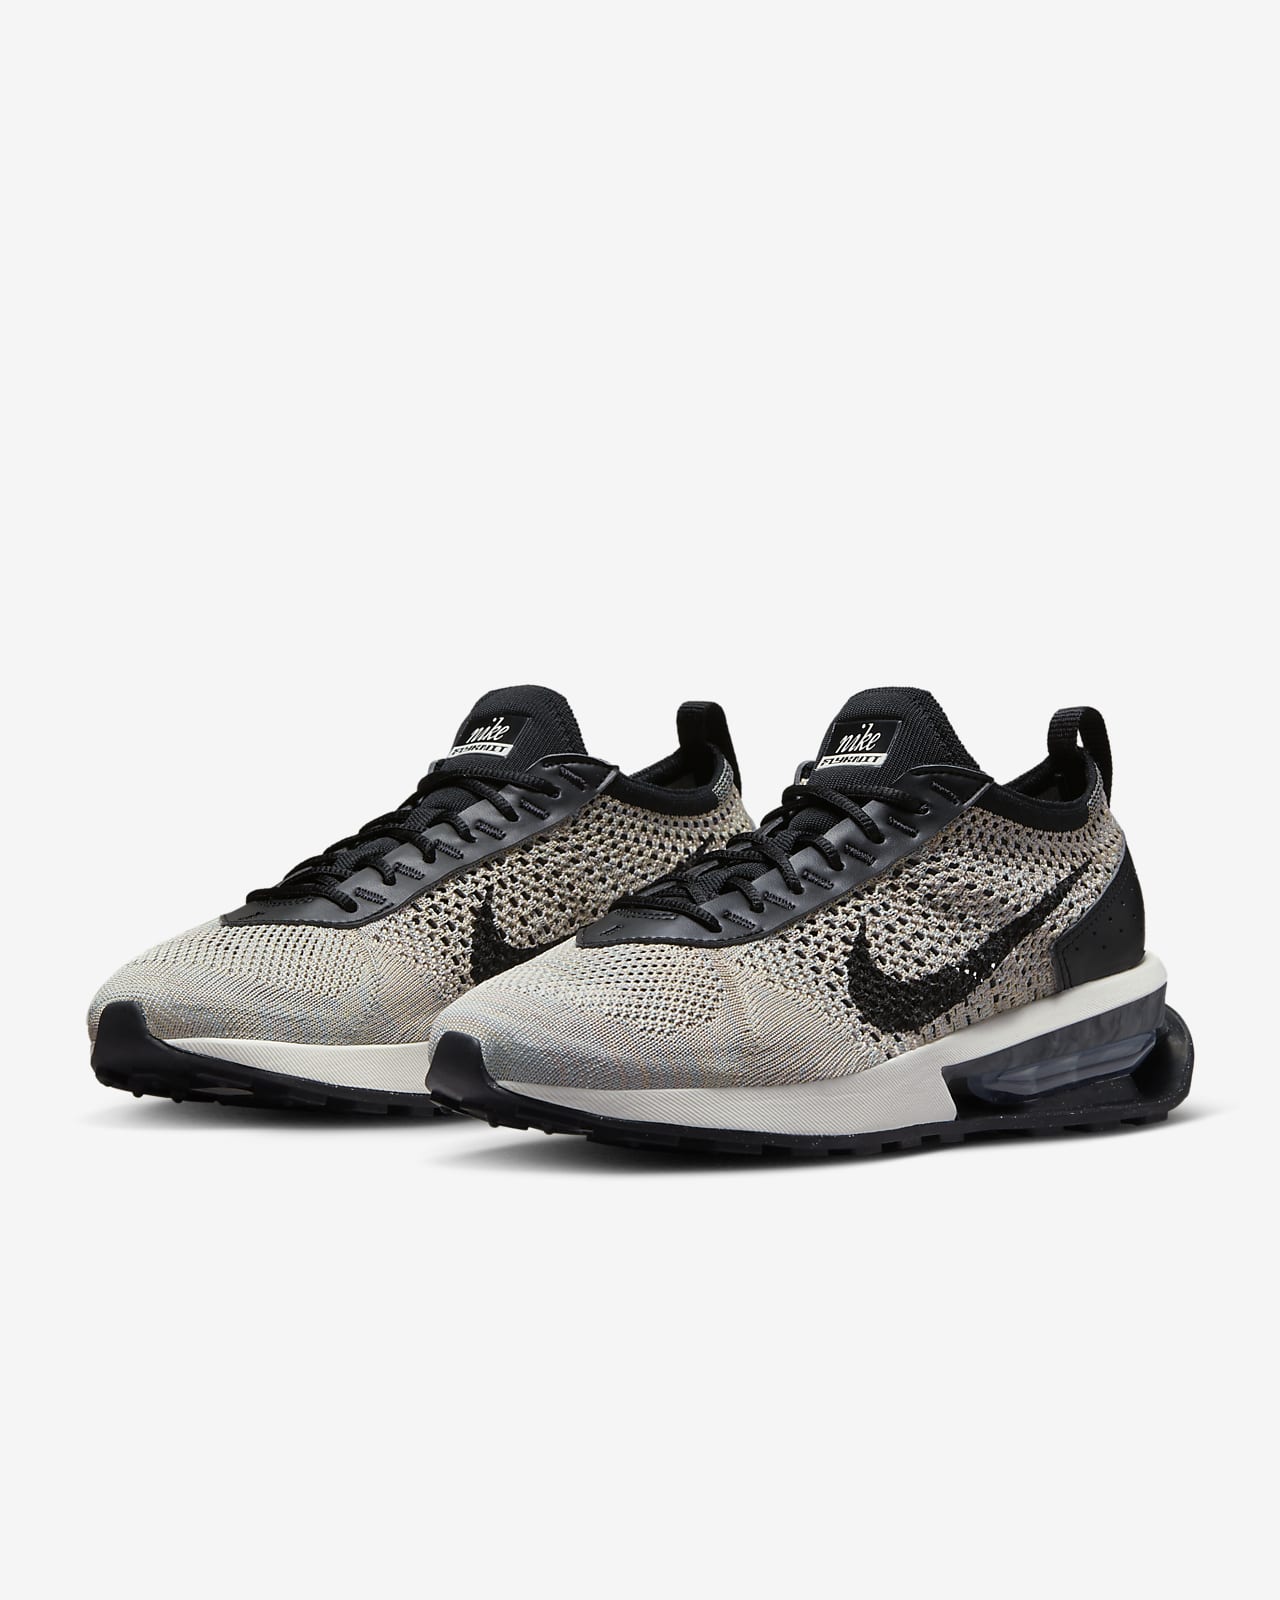 appetite Consecutive Maiden Nike Air Max Flyknit Racer Women's Shoes. Nike LU